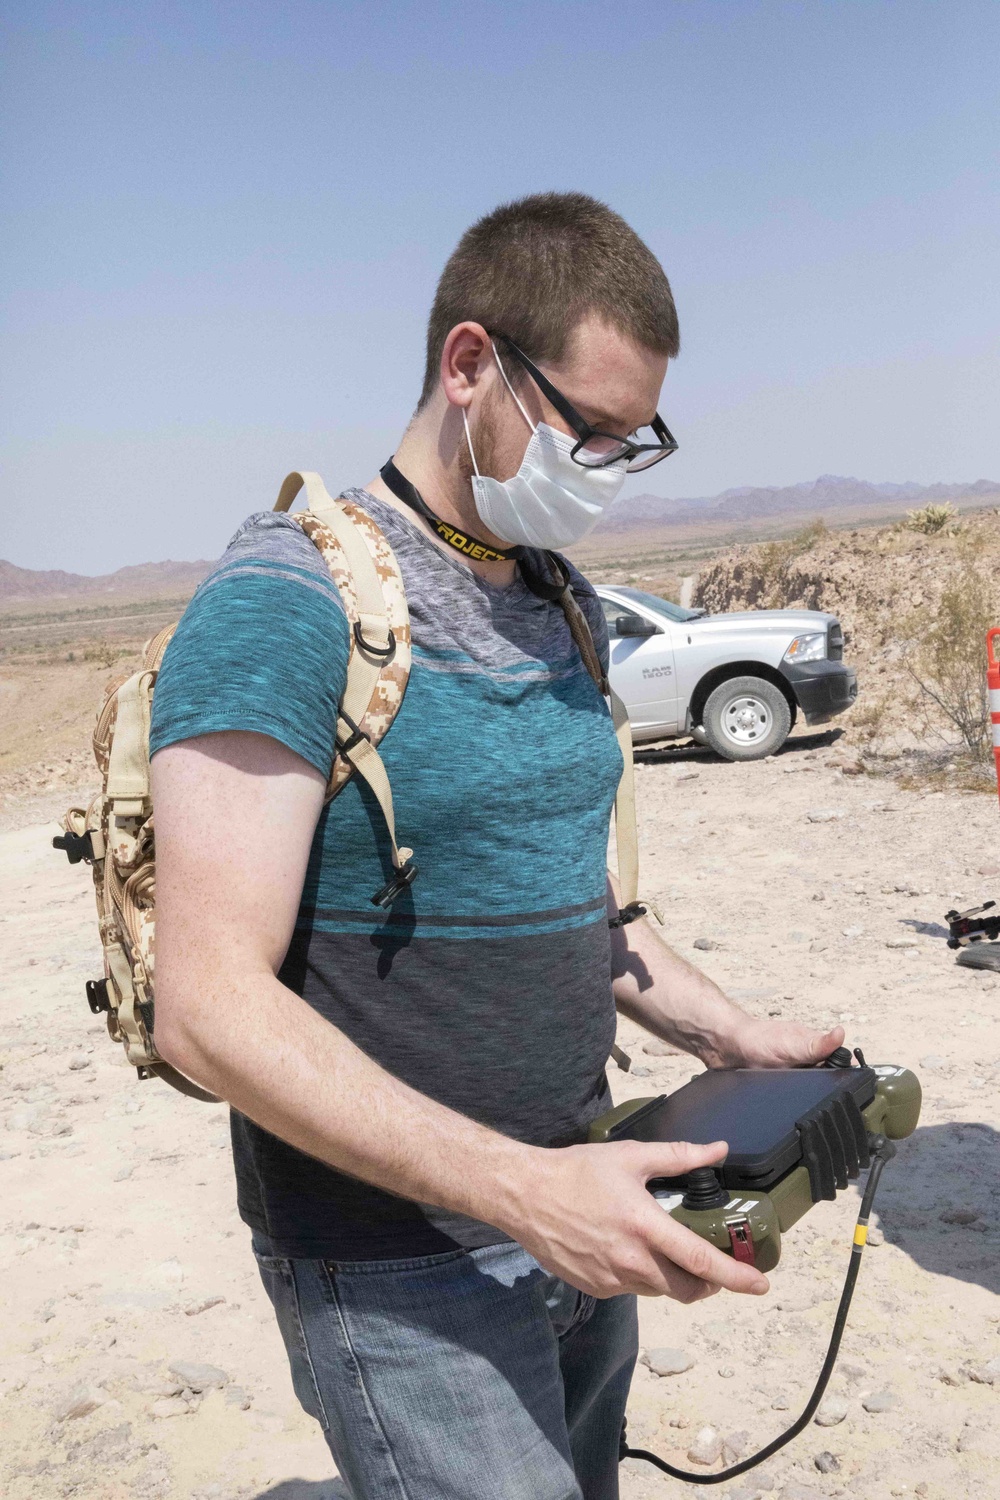 Jeremy Barker, software developer for Origin interface, prepares the vehicle's systems during the Project Convergence capstone event at Yuma Proving Ground, Arizona, Aug. 11 – Sept. 18, 2020.